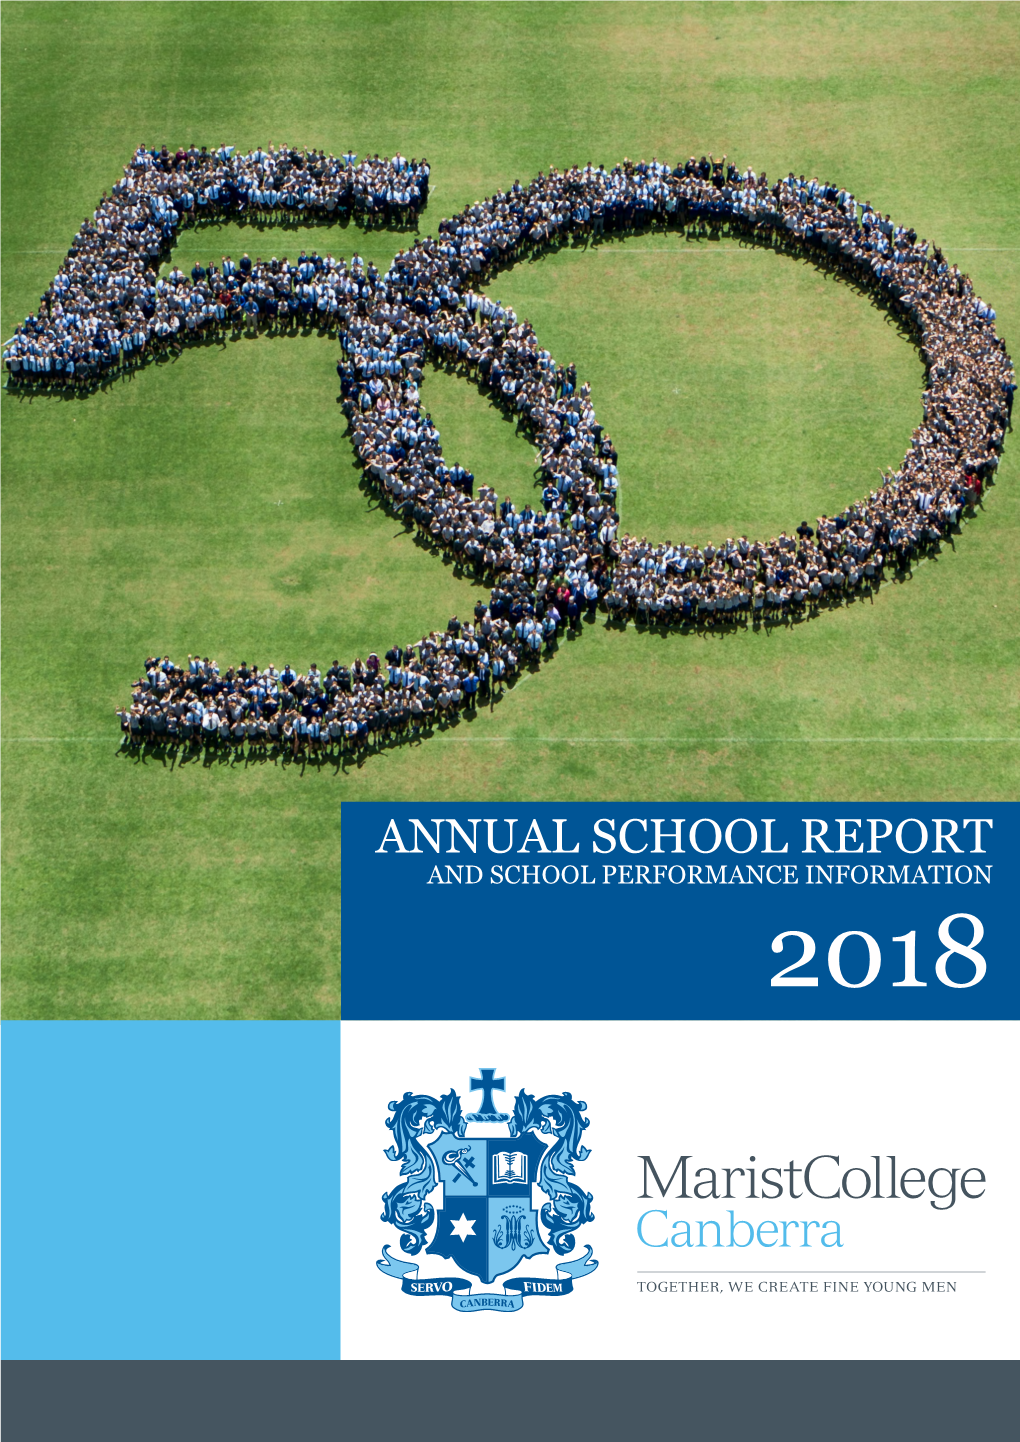 Annual School Report and School Performance Information 2018